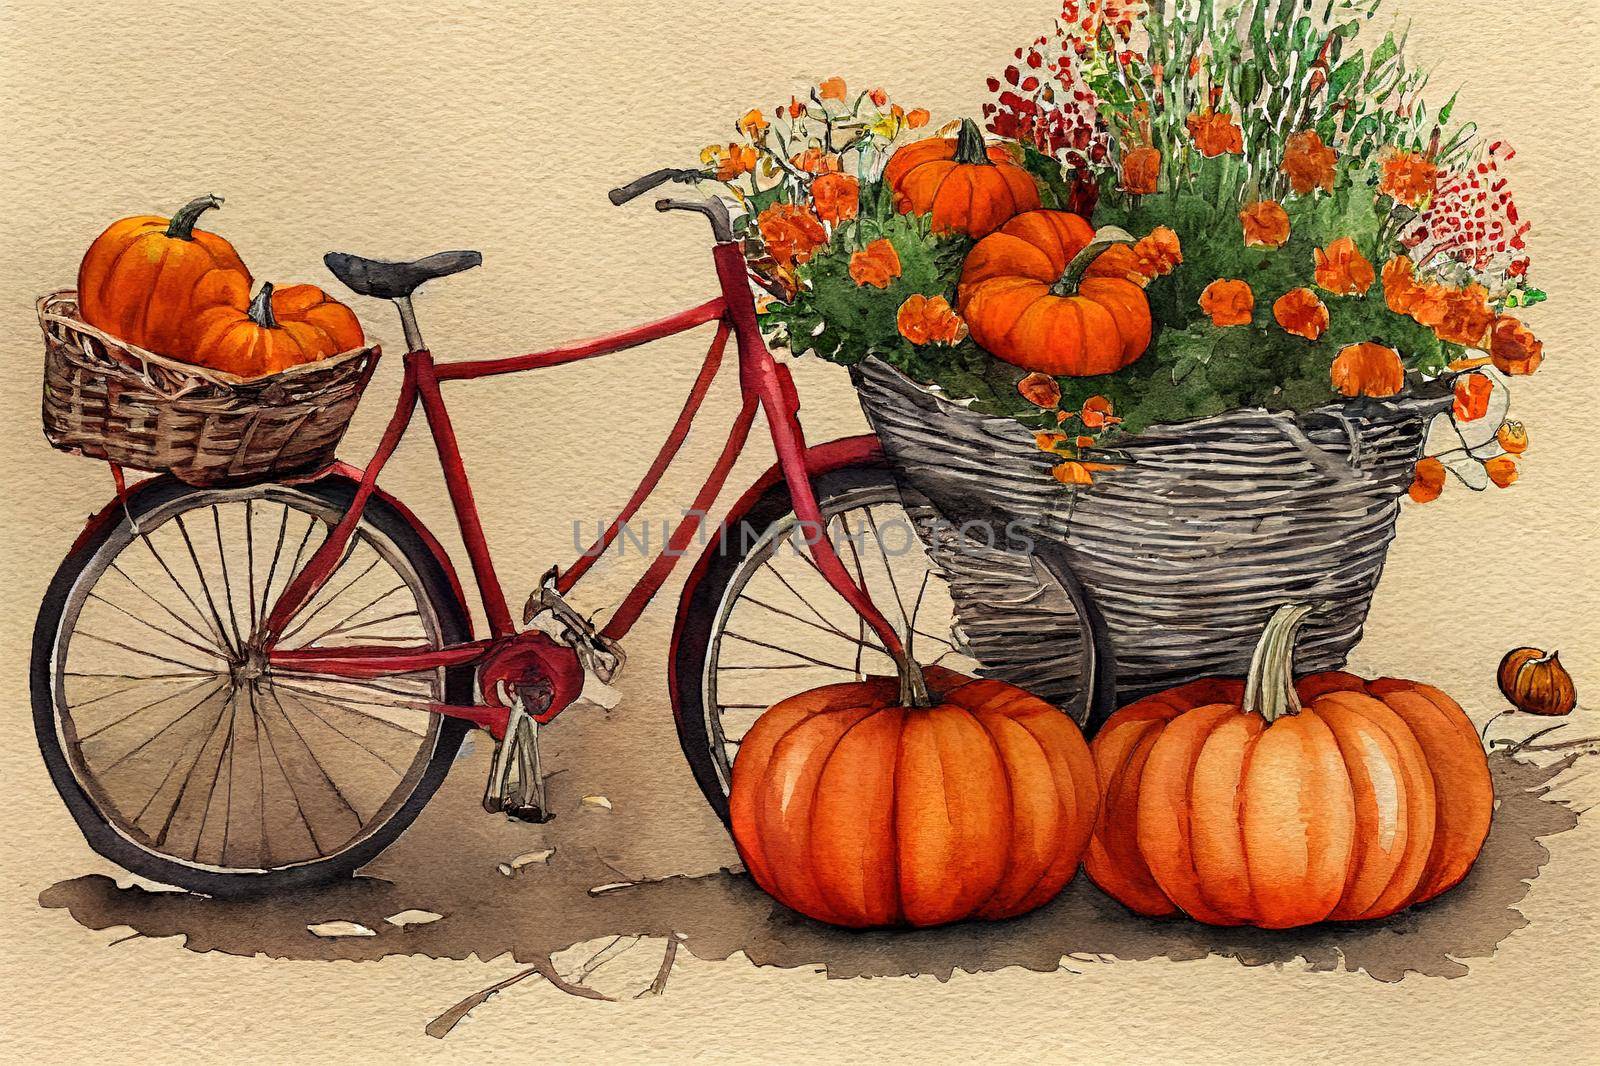 Red bike with a basket of flowers and pumpkins by 2ragon